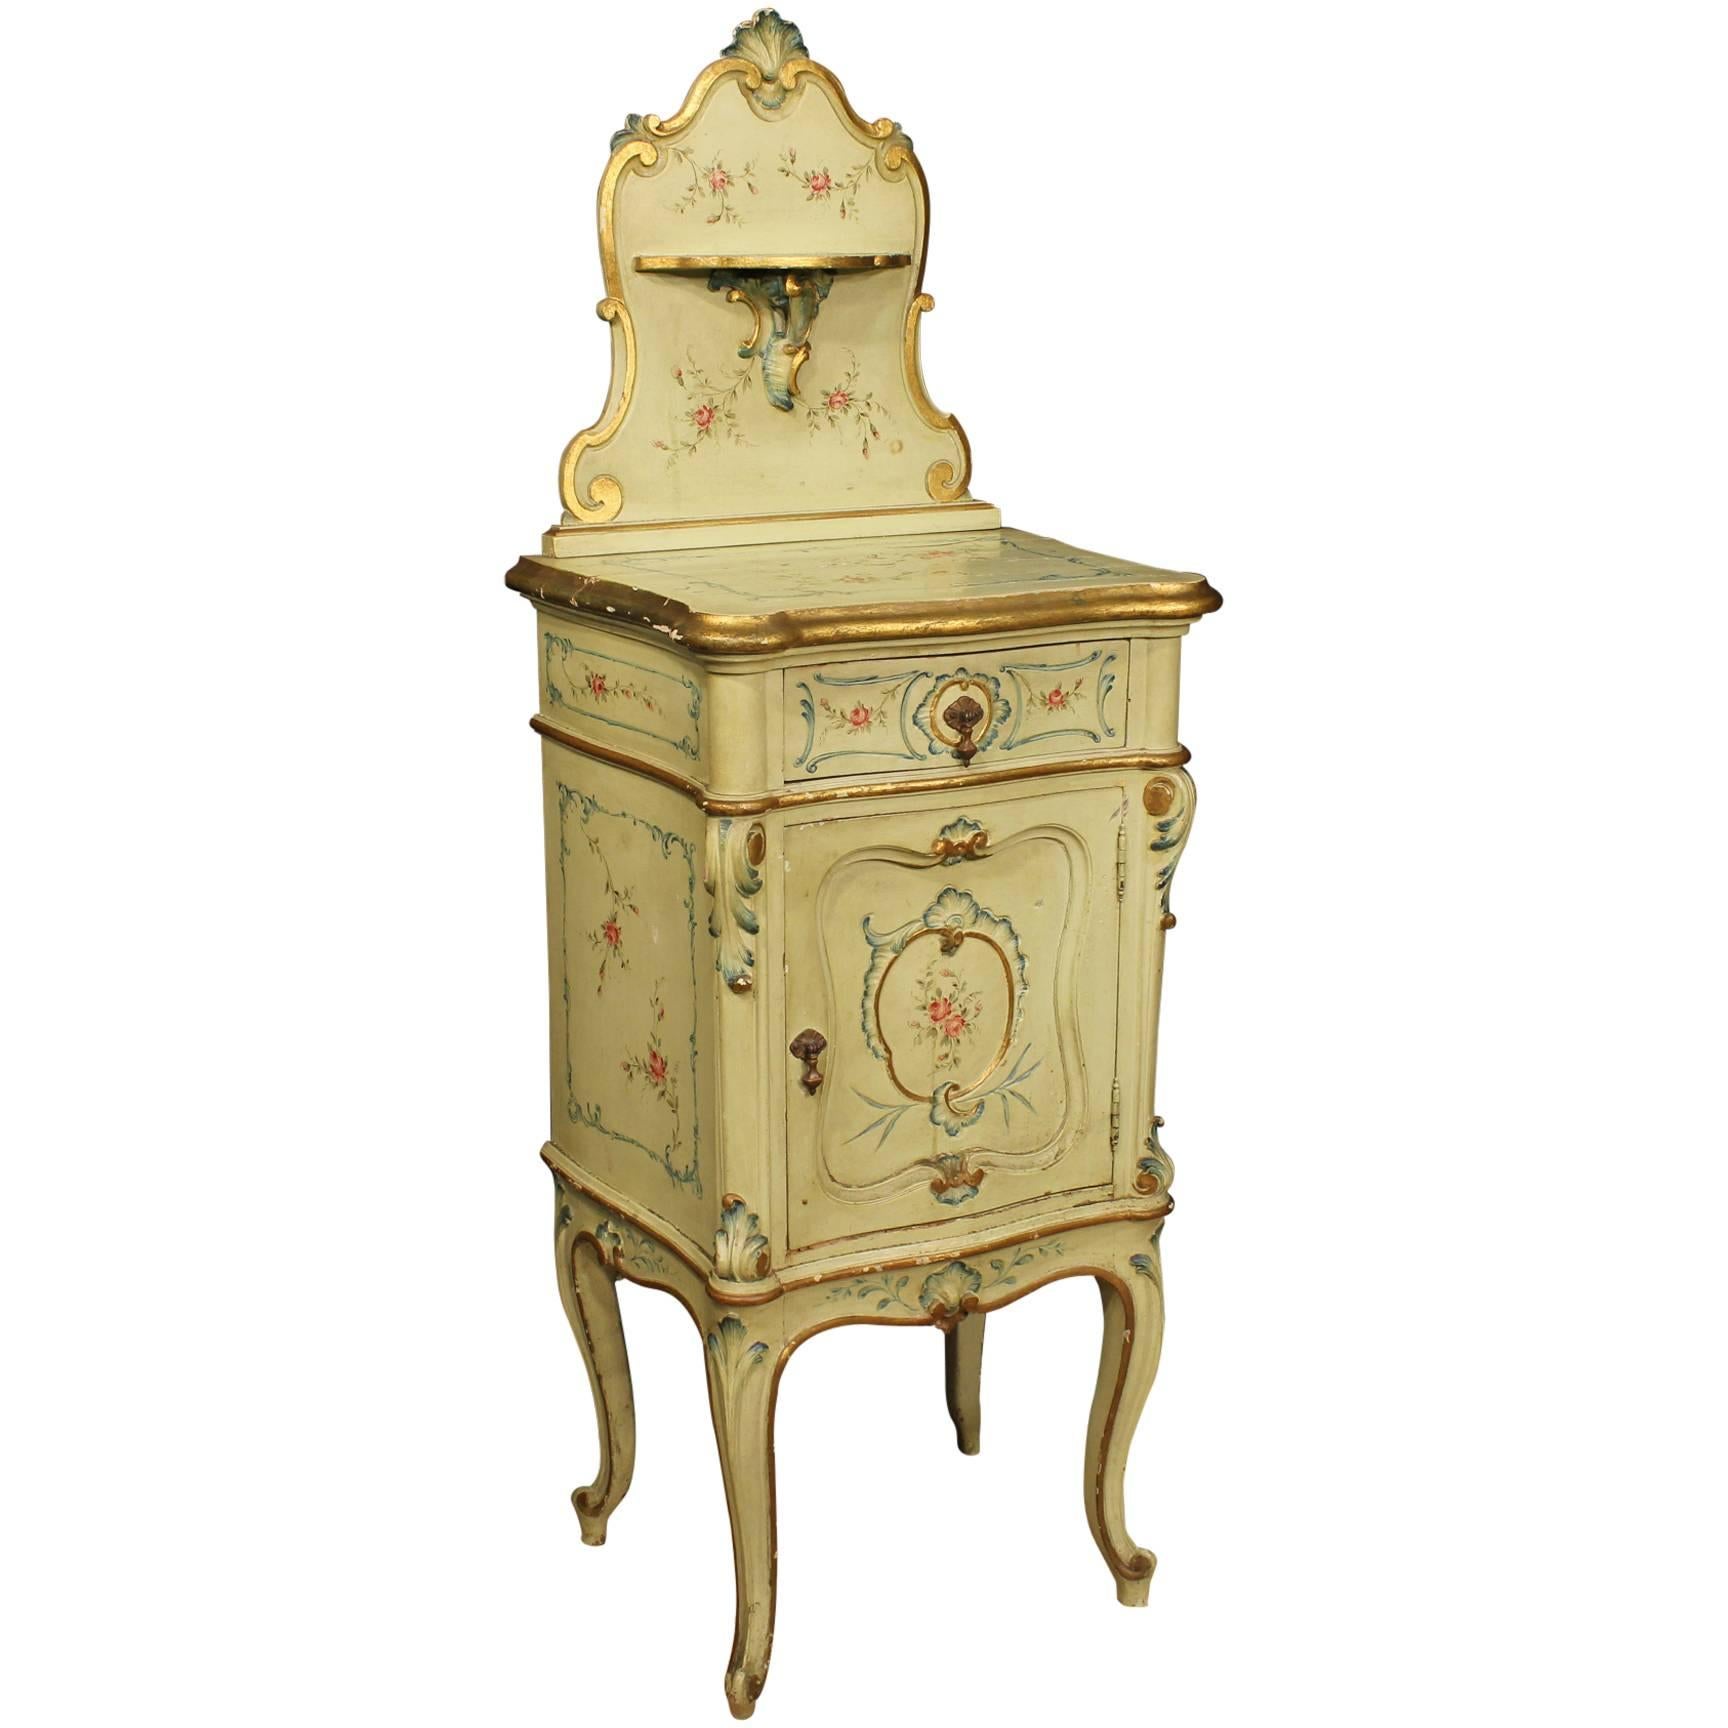 20th Century Bedside Table Made by Lacquered Hand-Painted Giltwood